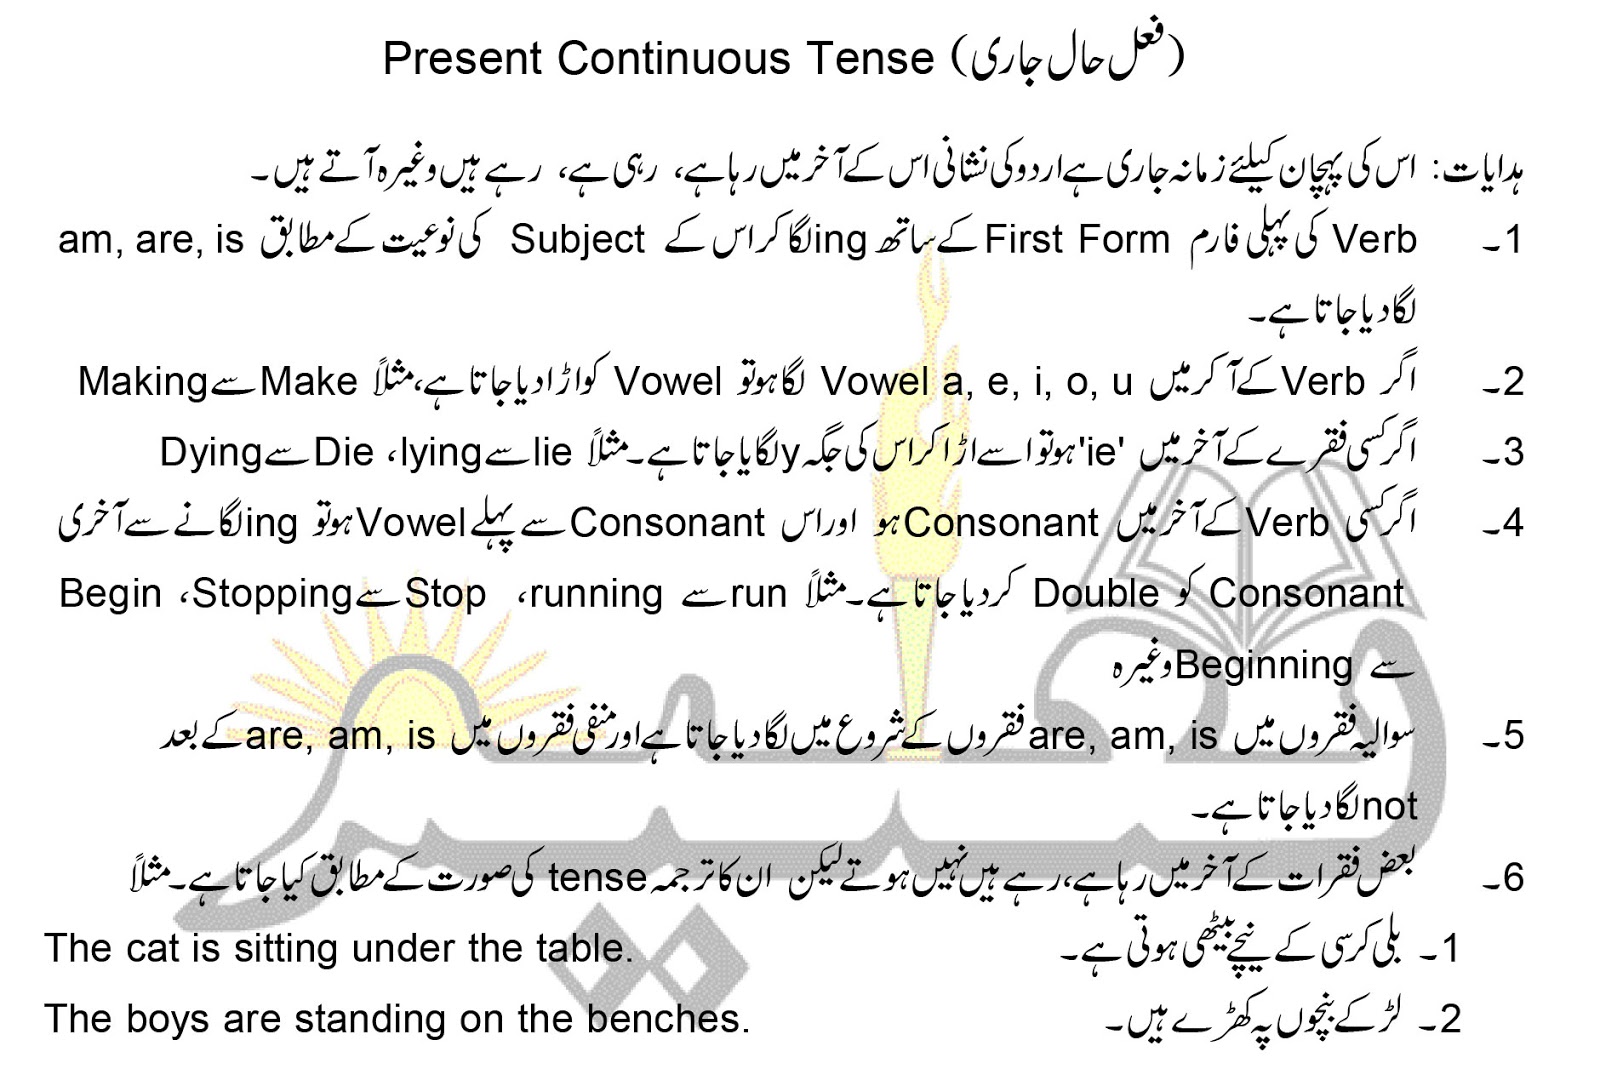 present-continuous-tense-definition-and-examples-structure-of-sentence